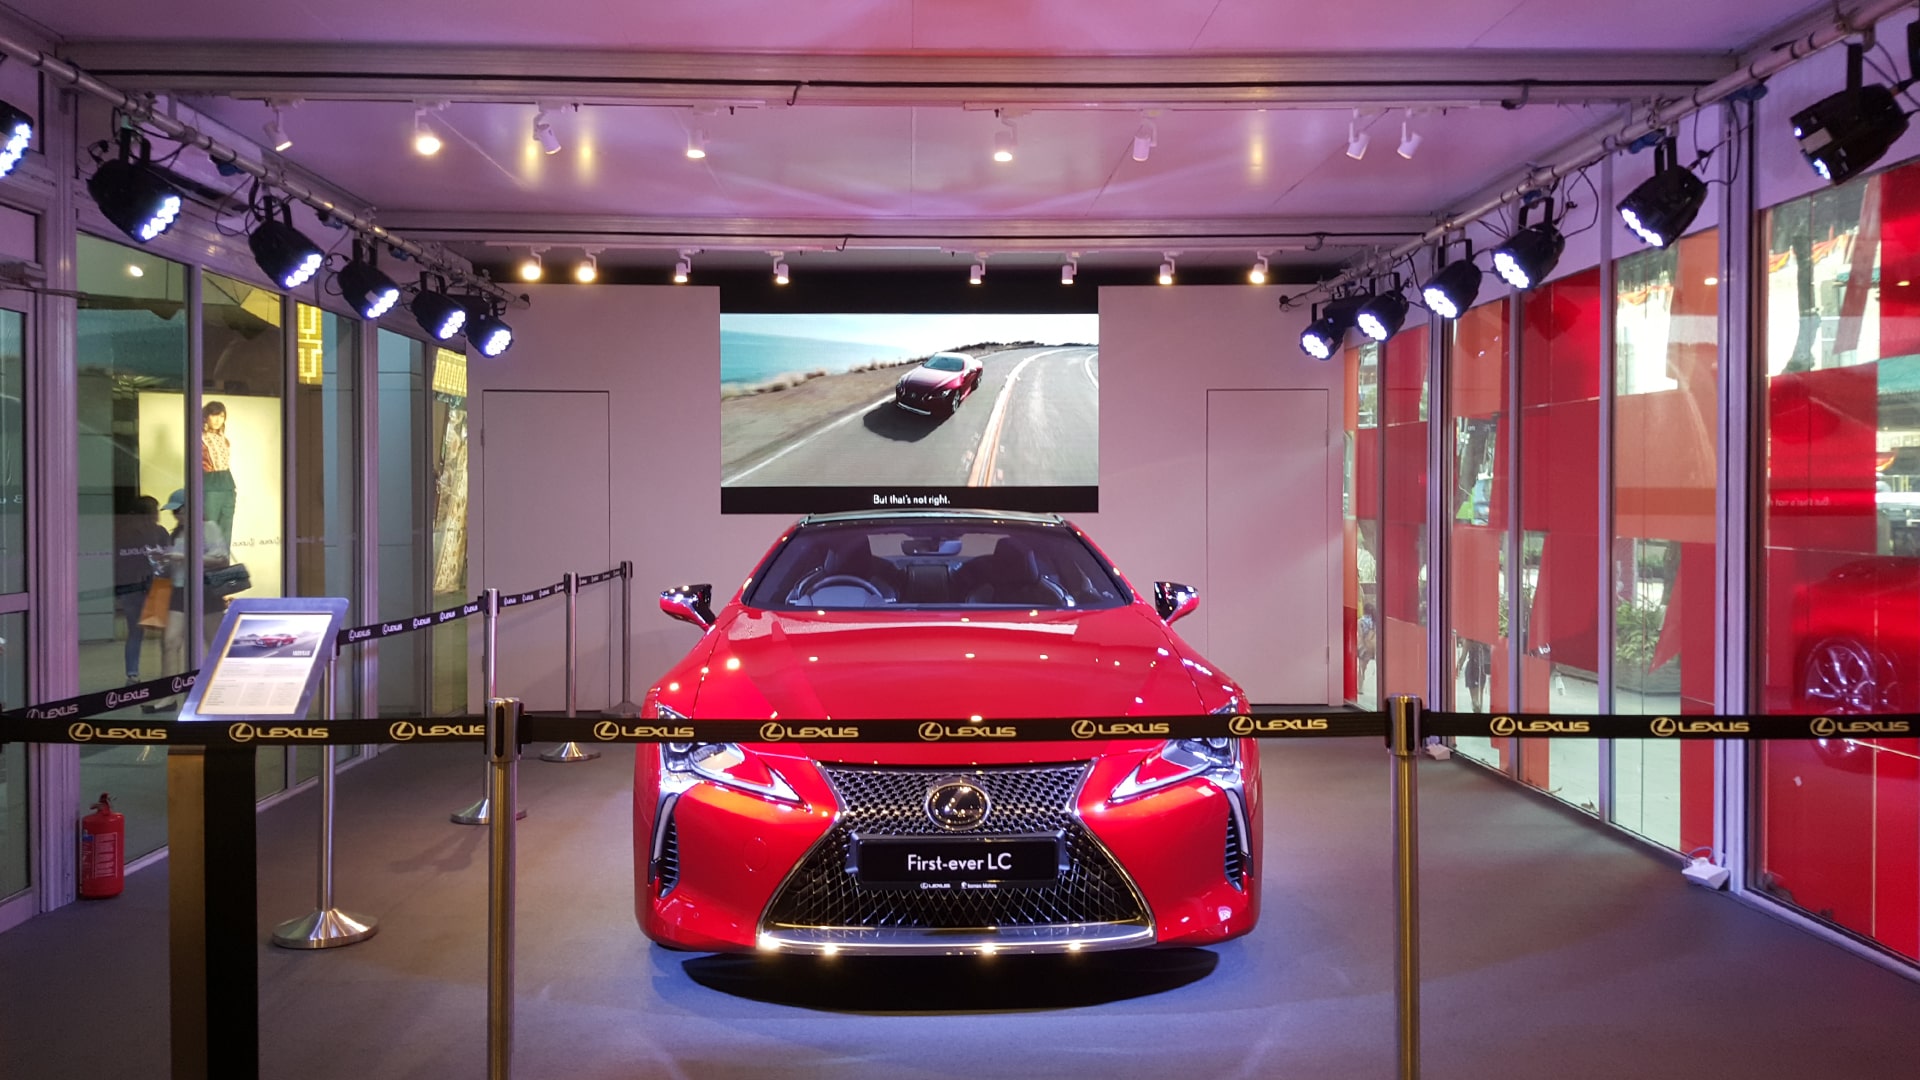 tsc_opt-images_tubelar-system_lexus-lc-press-conference-showroom-1920x1080-03-min